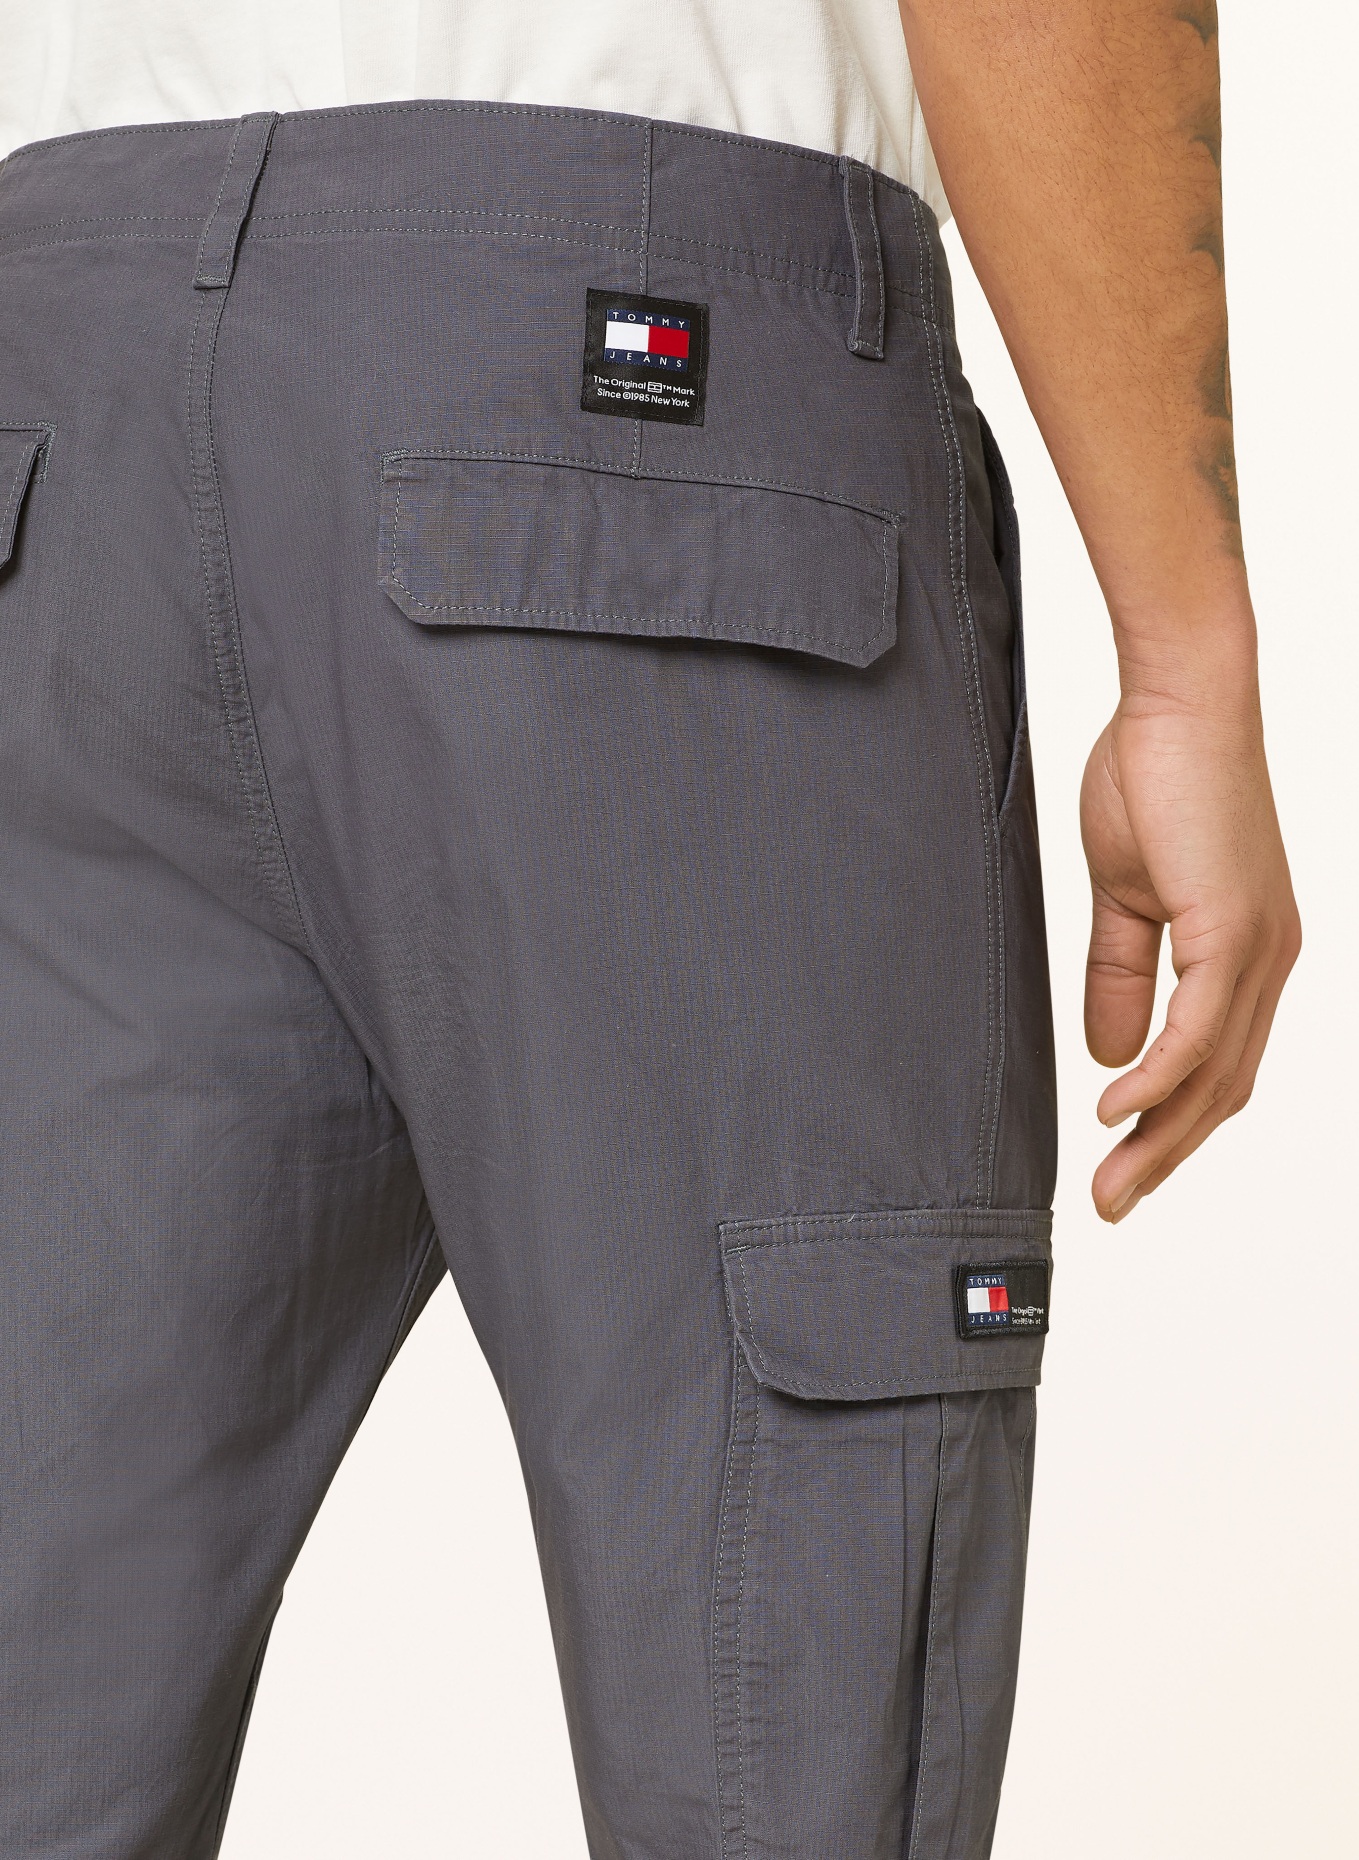 TOMMY JEANS Cargo pants ETHAN relaxed fit, Color: PT2 Washed Black (Image 6)